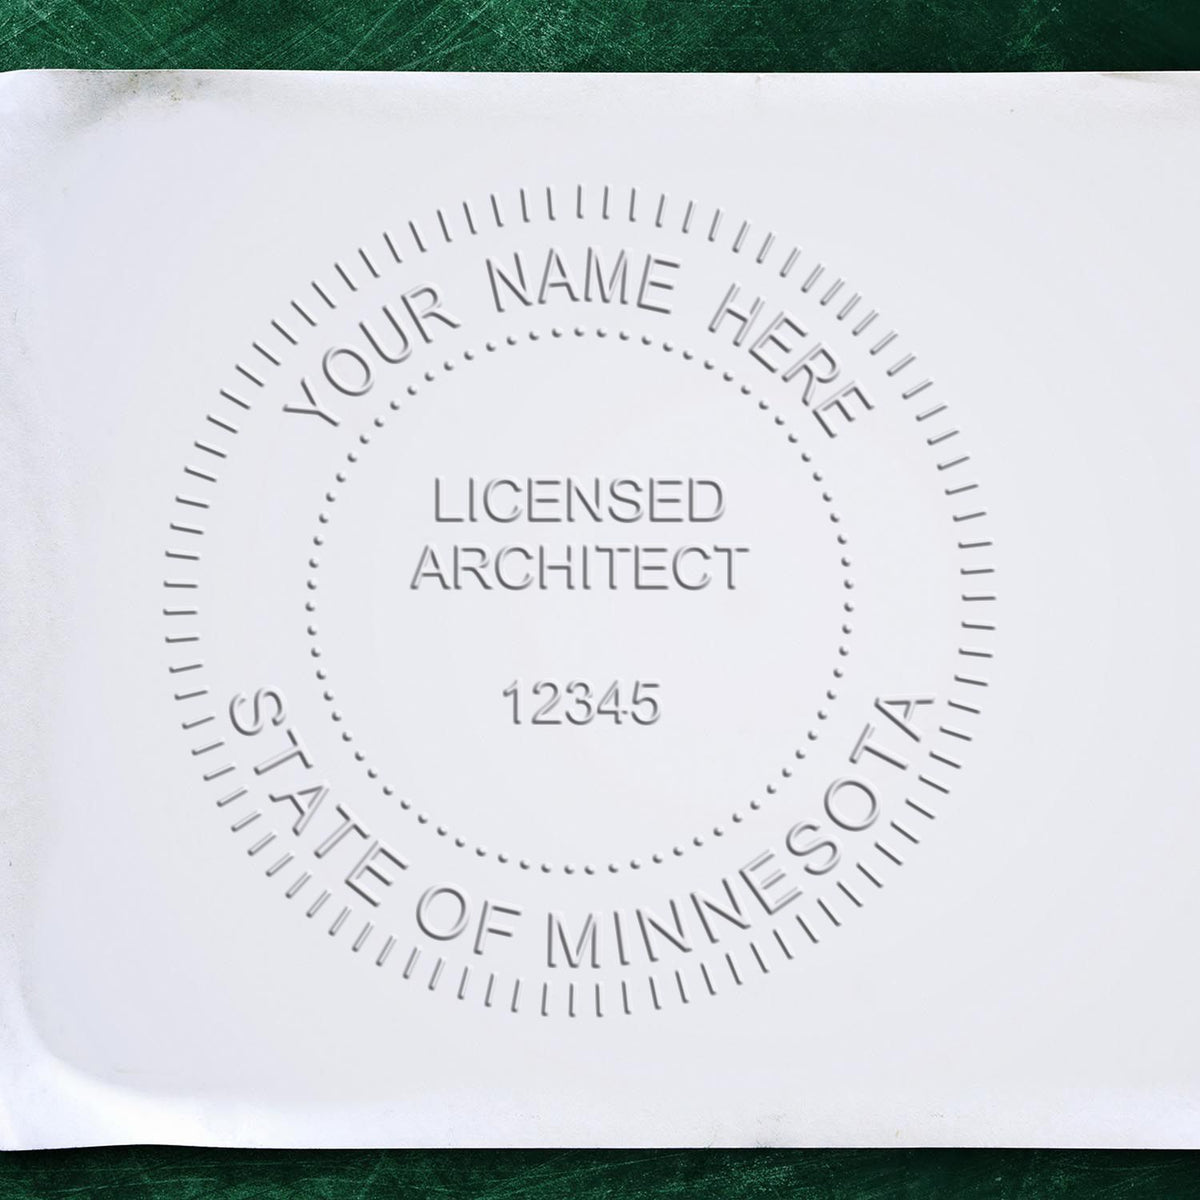 Extended Long Reach Minnesota Architect Seal Embosser in use photo showing a stamped imprint of the Extended Long Reach Minnesota Architect Seal Embosser